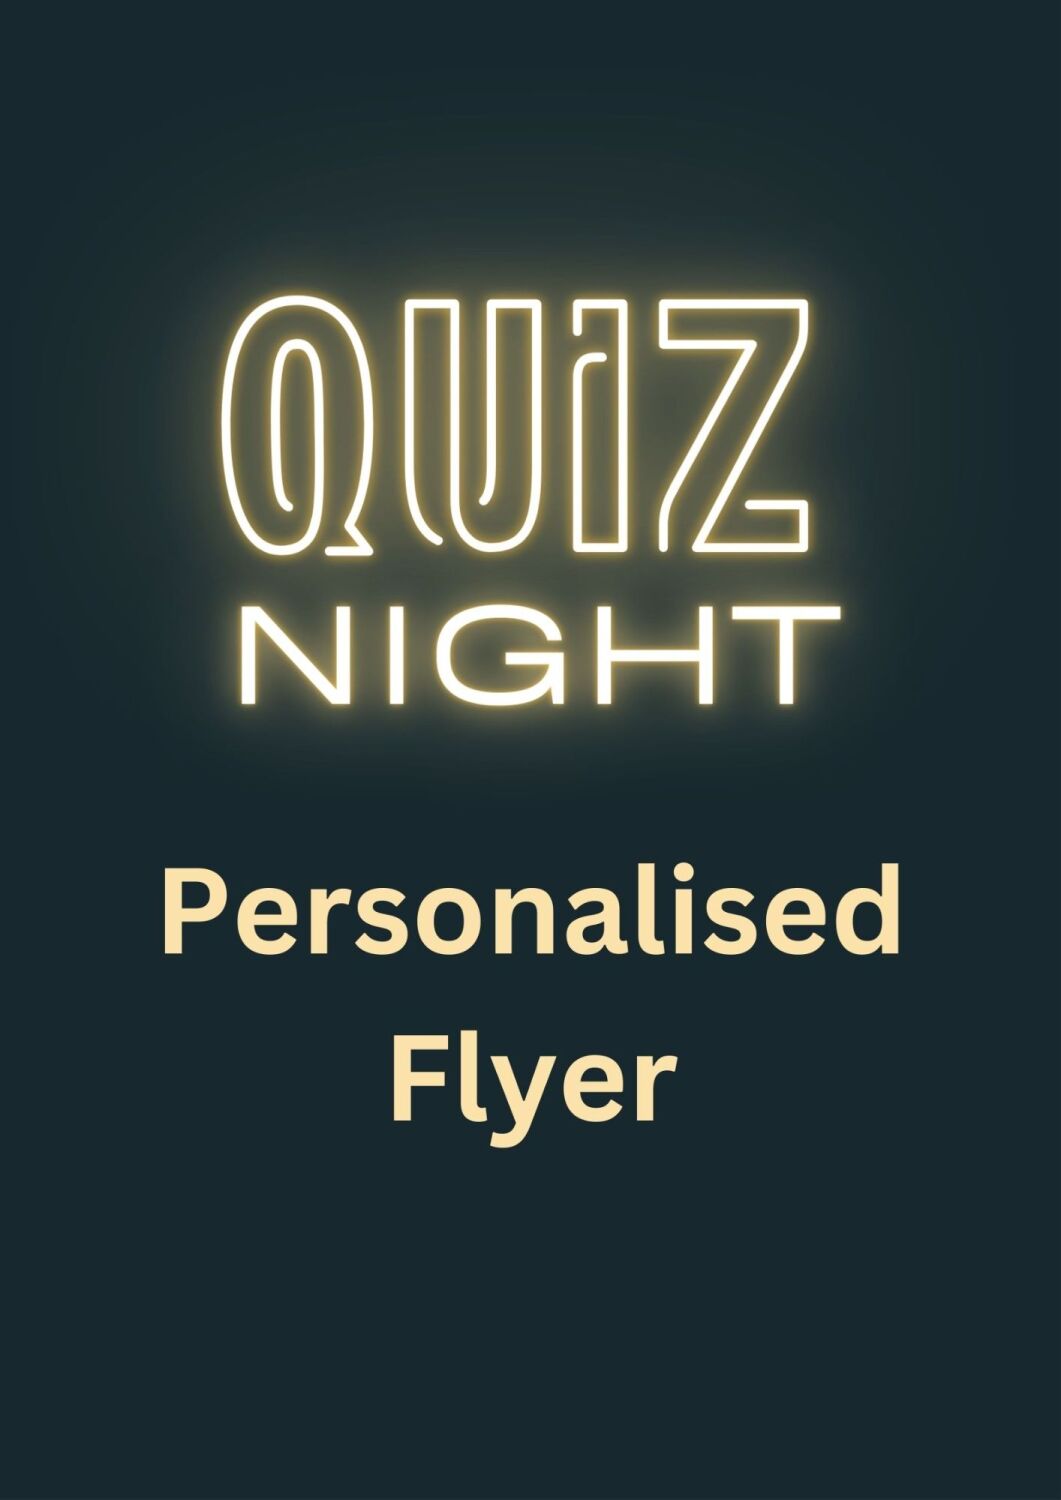 Customised & Personalised Pub Quiz / Party / Raffle Invite / Flyer / Poster